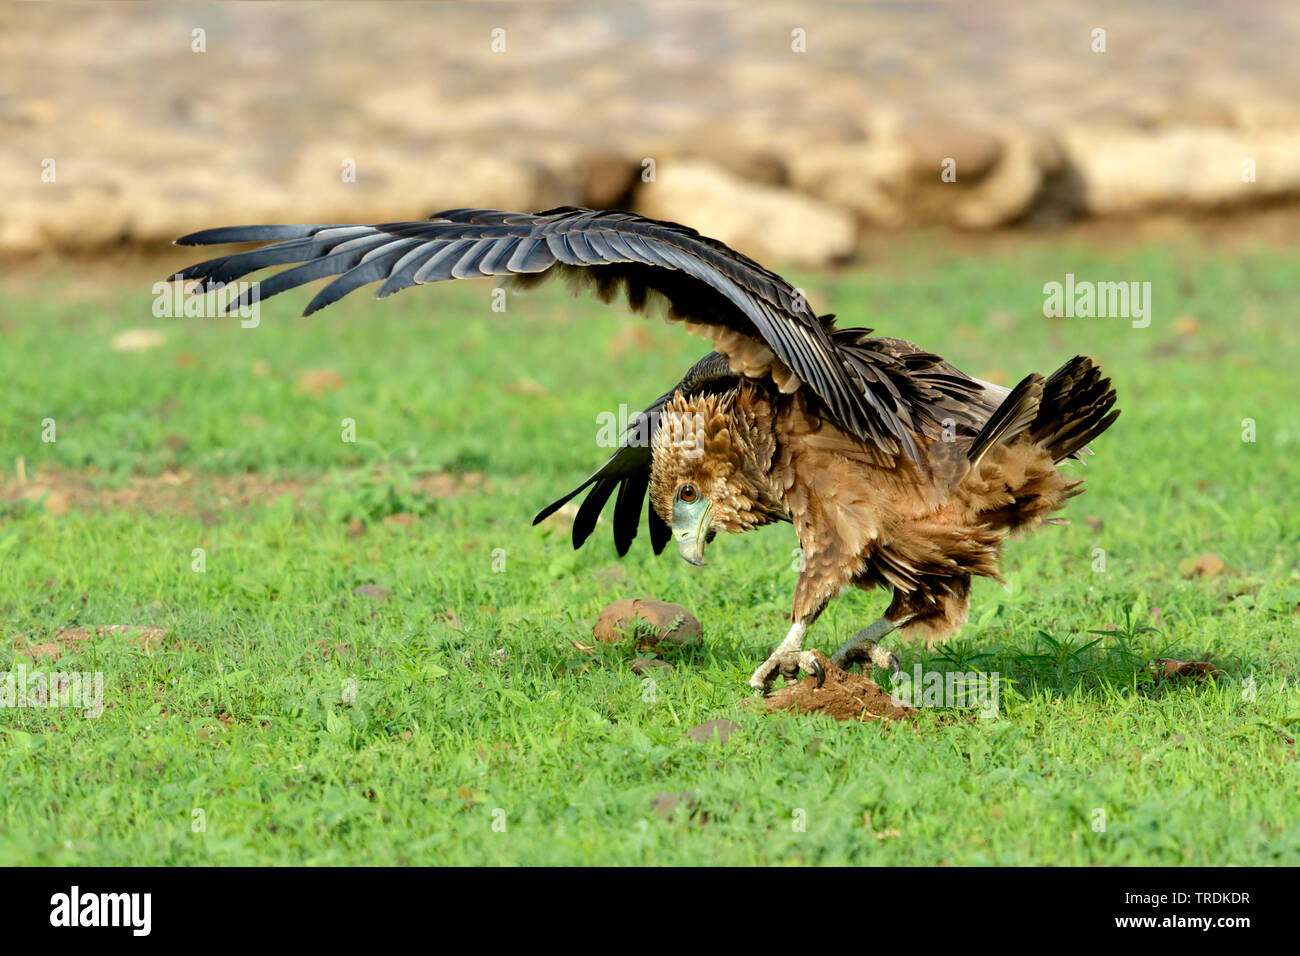 tawny eagle (Aquila rapax), young bird clutching in an hole in the ground, side view, South Africa, Lowveld, Krueger National Park Stock Photo